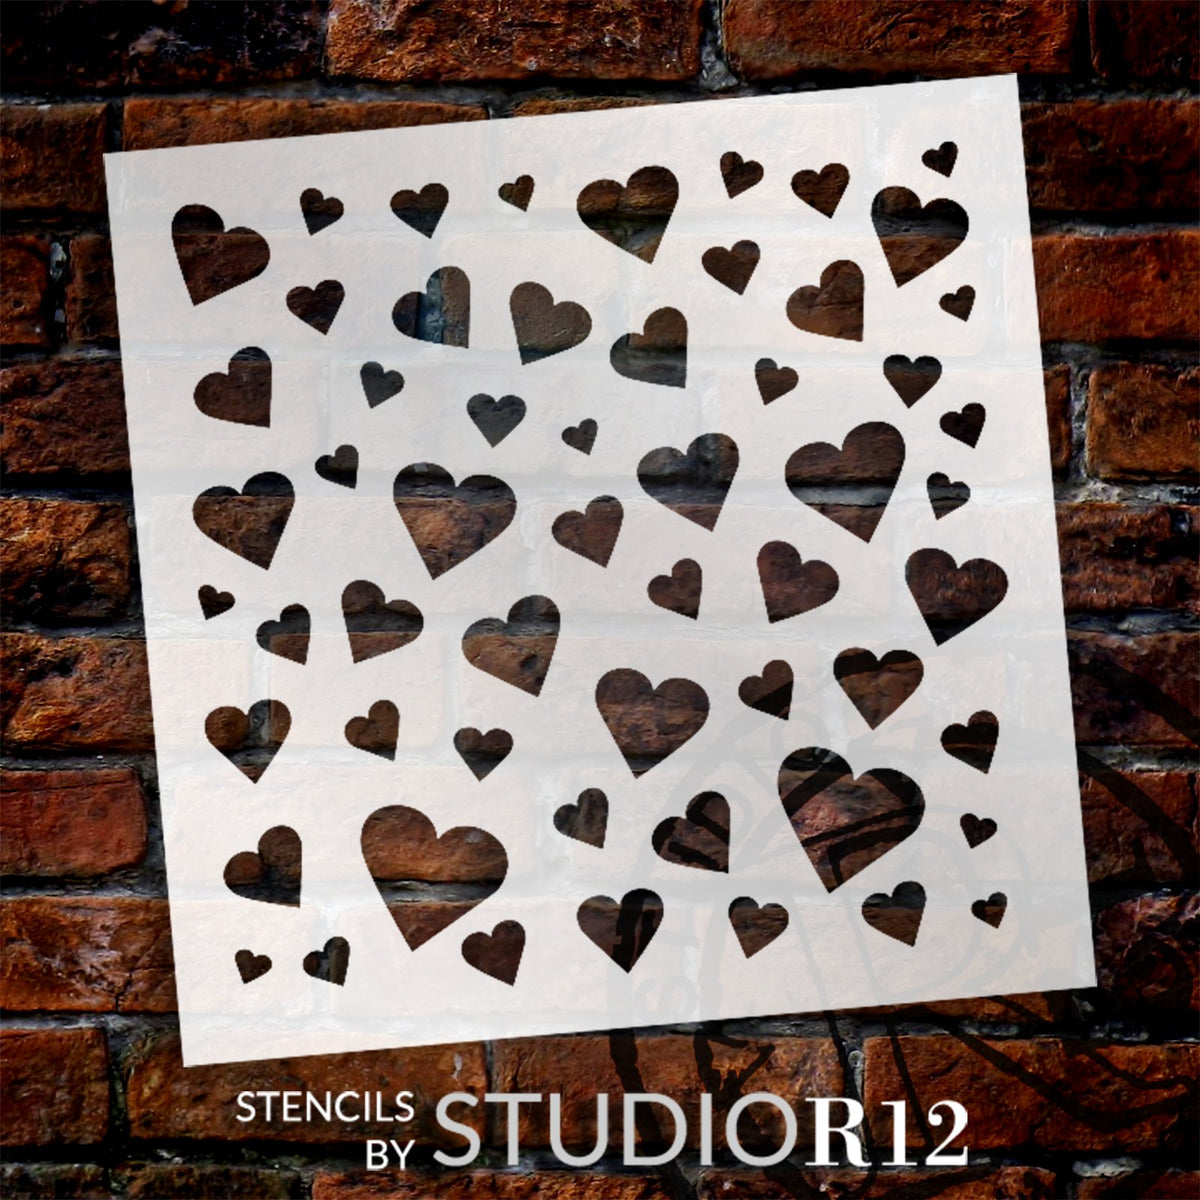 Handmade Hearts Stencil Pattern by StudioR12, Art & Crafts for Kids, Paint Heart Backgrounds Scrapbooking Cards Walls Cakes Cookies